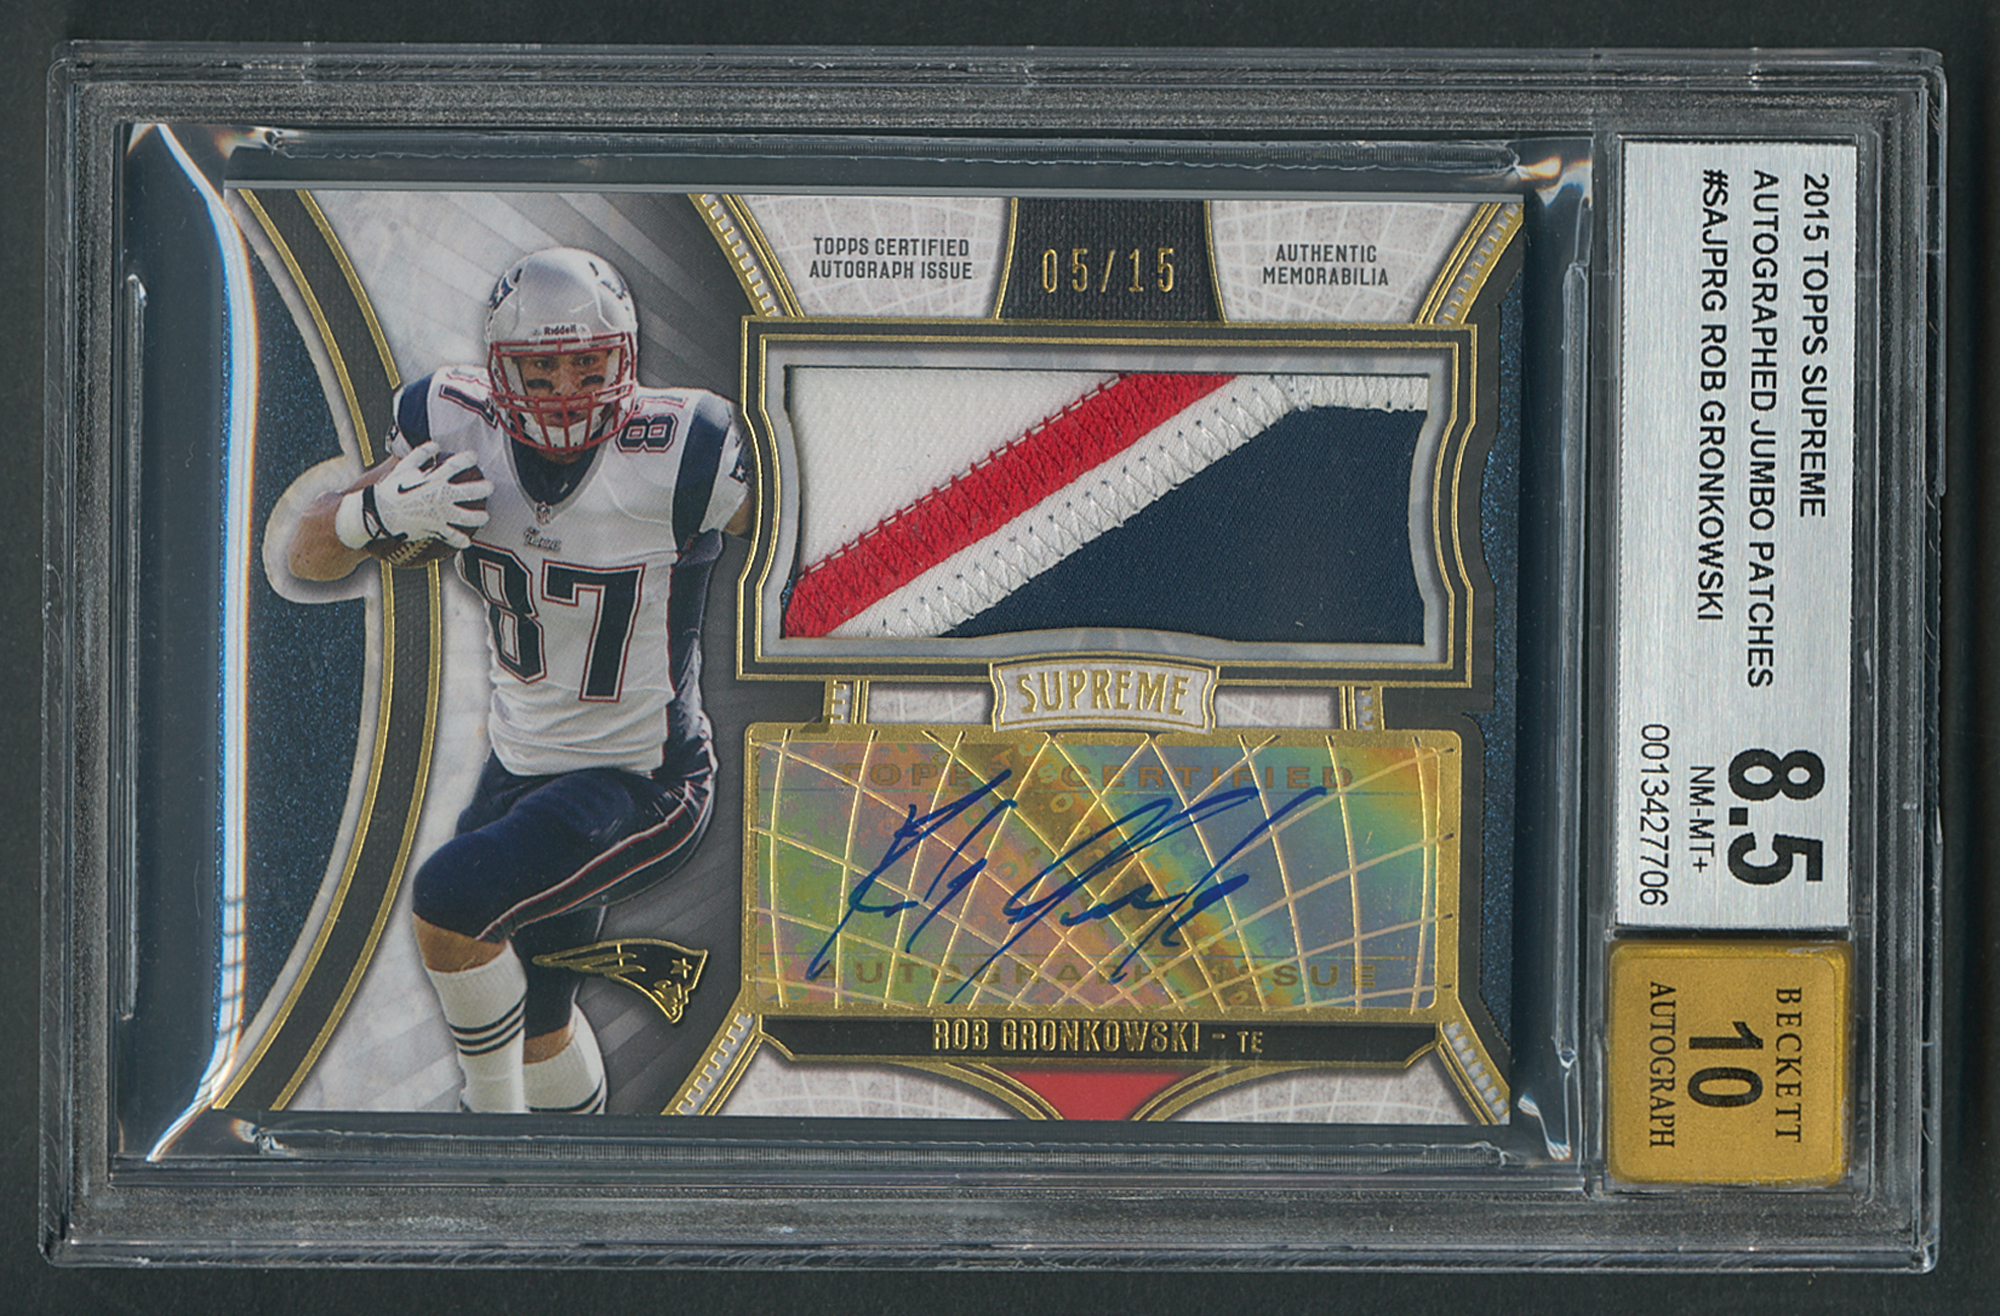 Lot #1018 2015 Topps Supreme Rob Gronkowski Autograph/Patch (5/15) BGS NM-MT+ 8.5/10